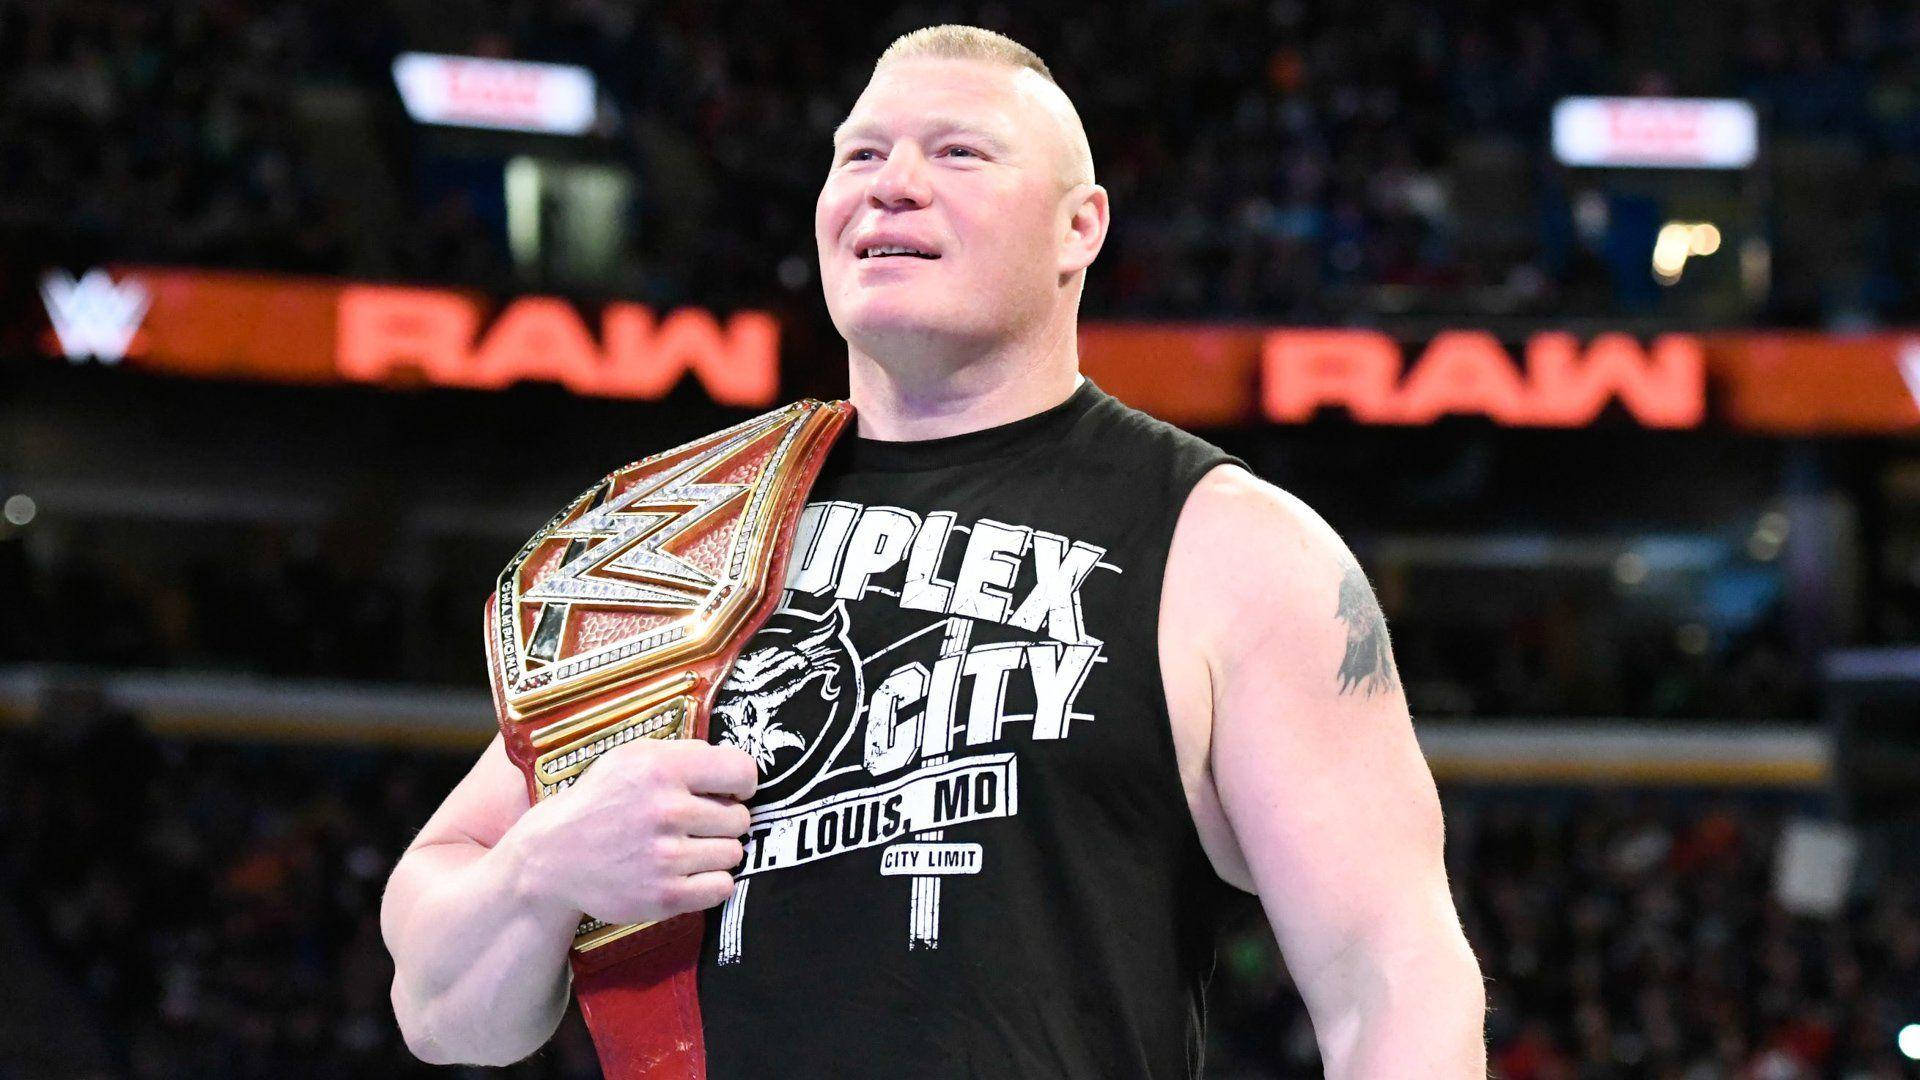 Powerhouse Wwe Athlete, Brock Lesnar, In Action Background